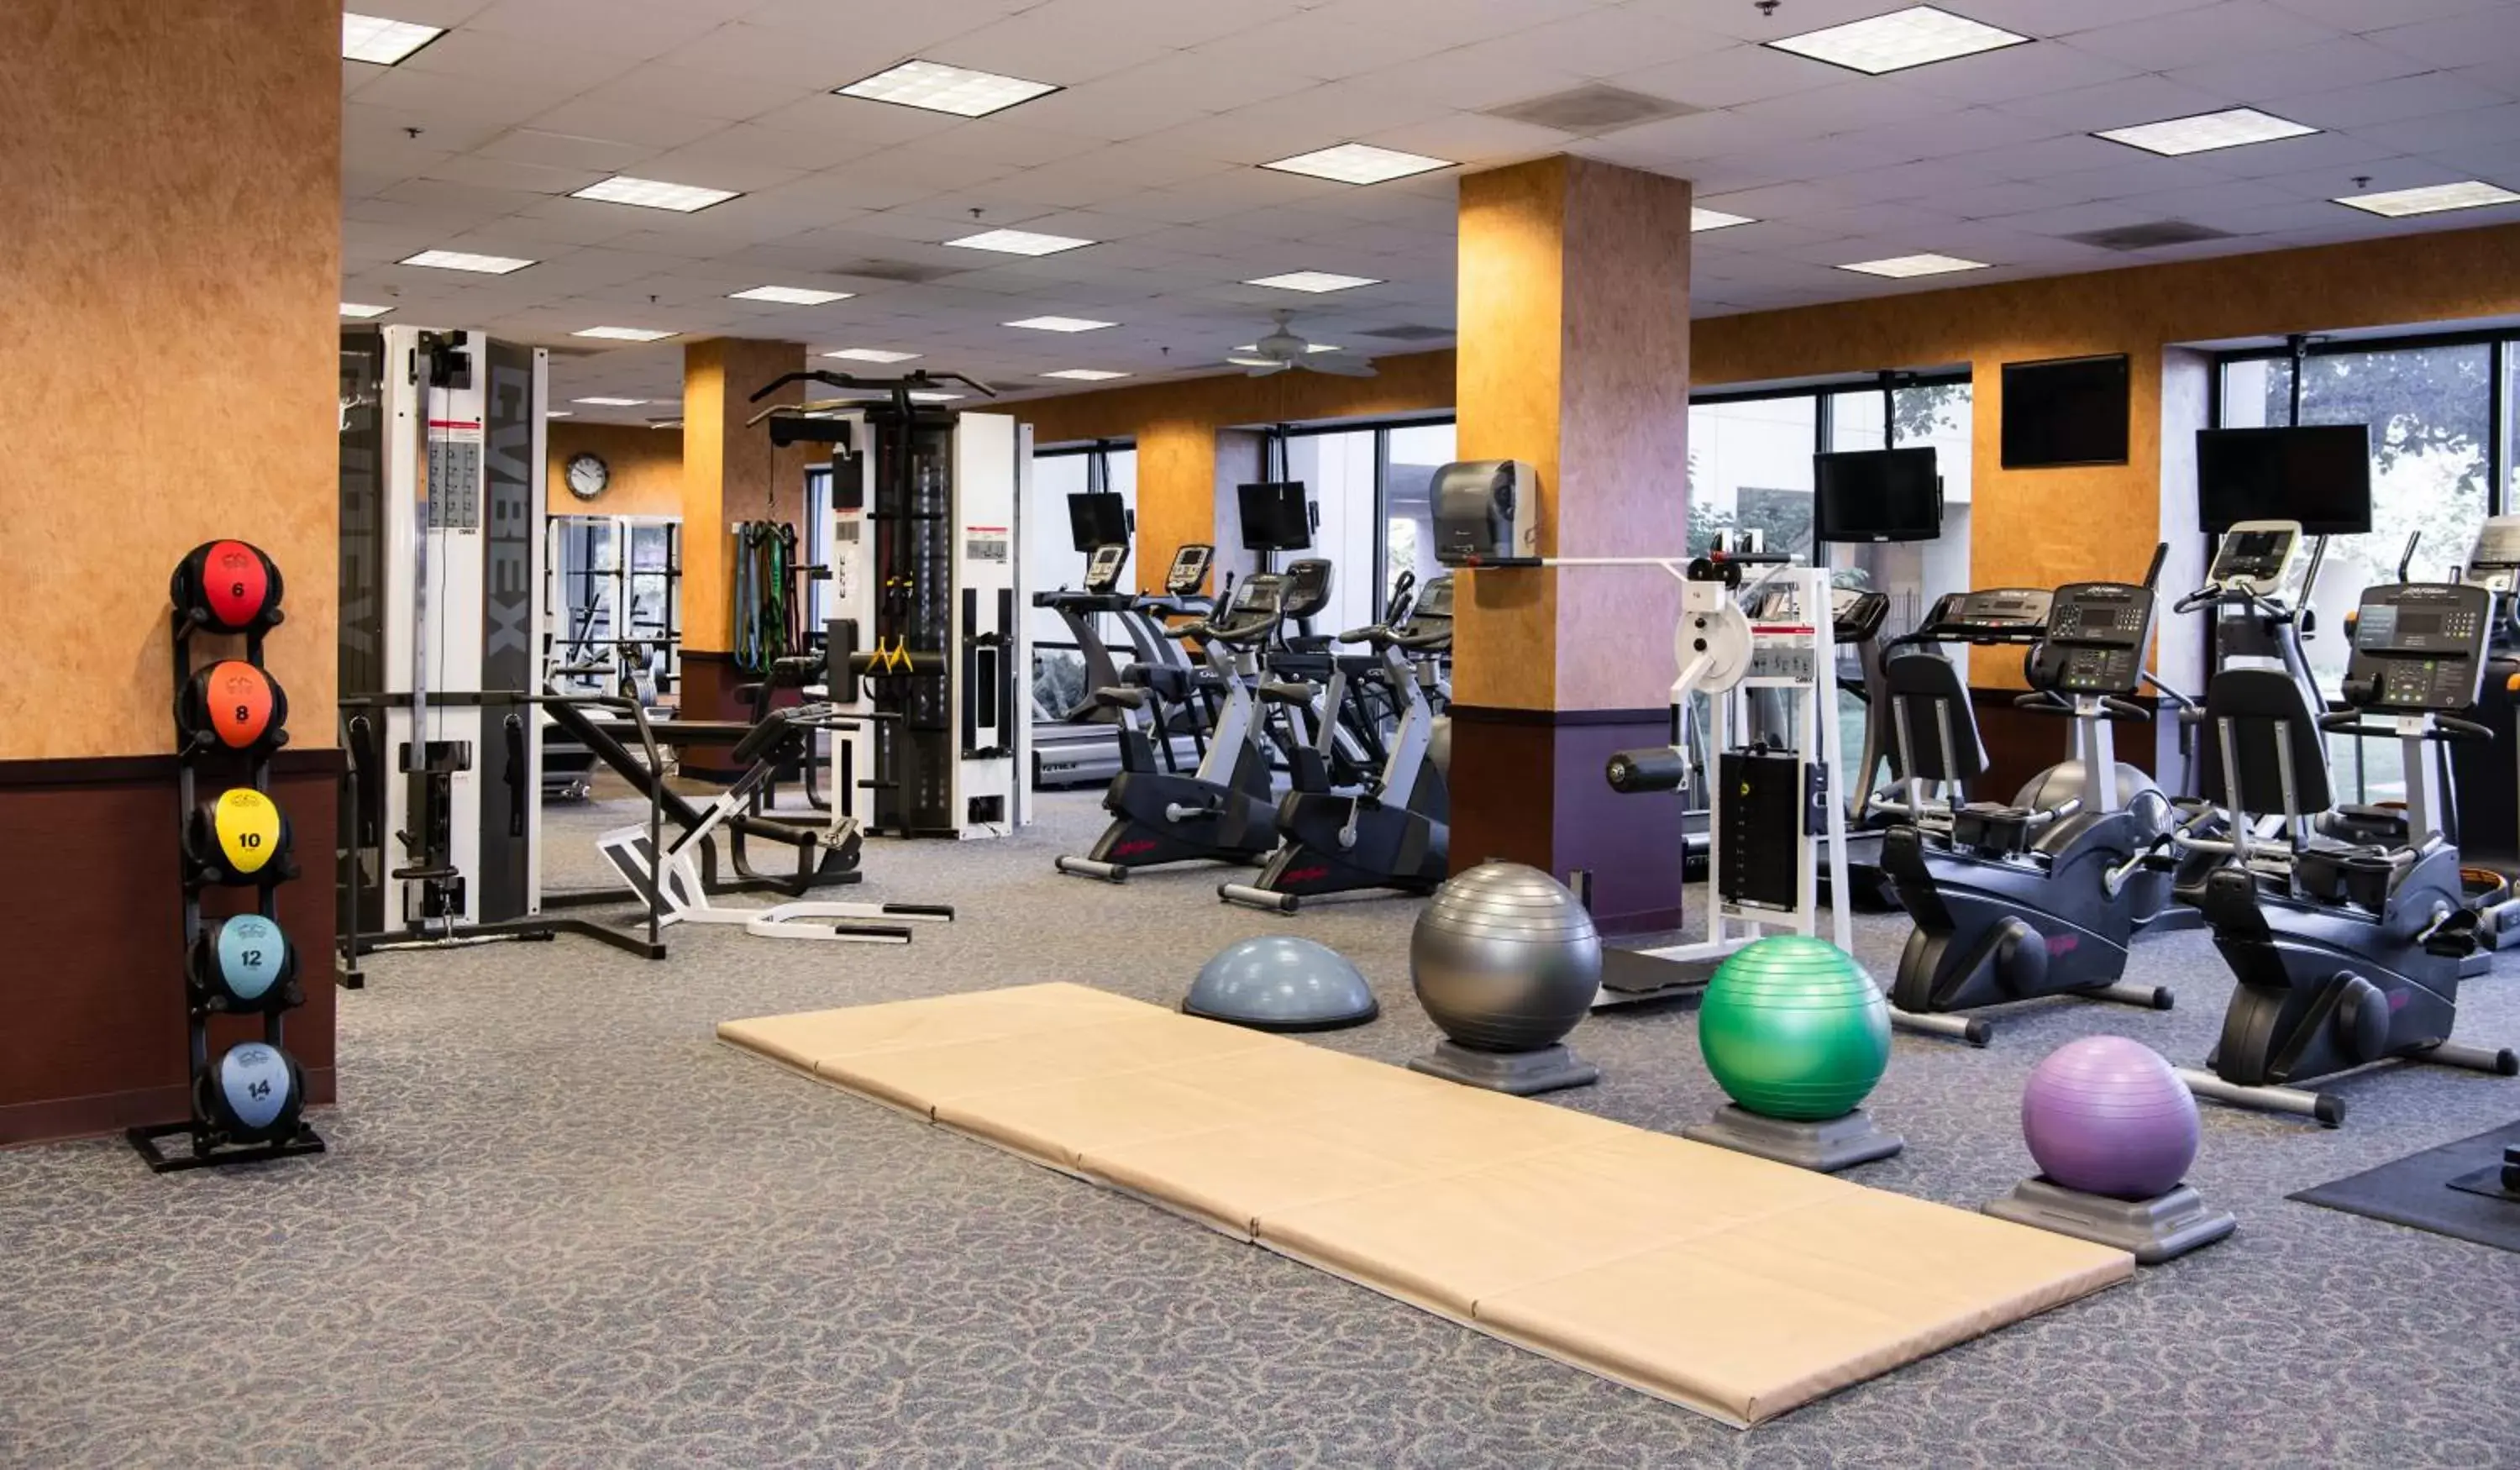 Fitness centre/facilities, Fitness Center/Facilities in NCED Conference Center & Hotel